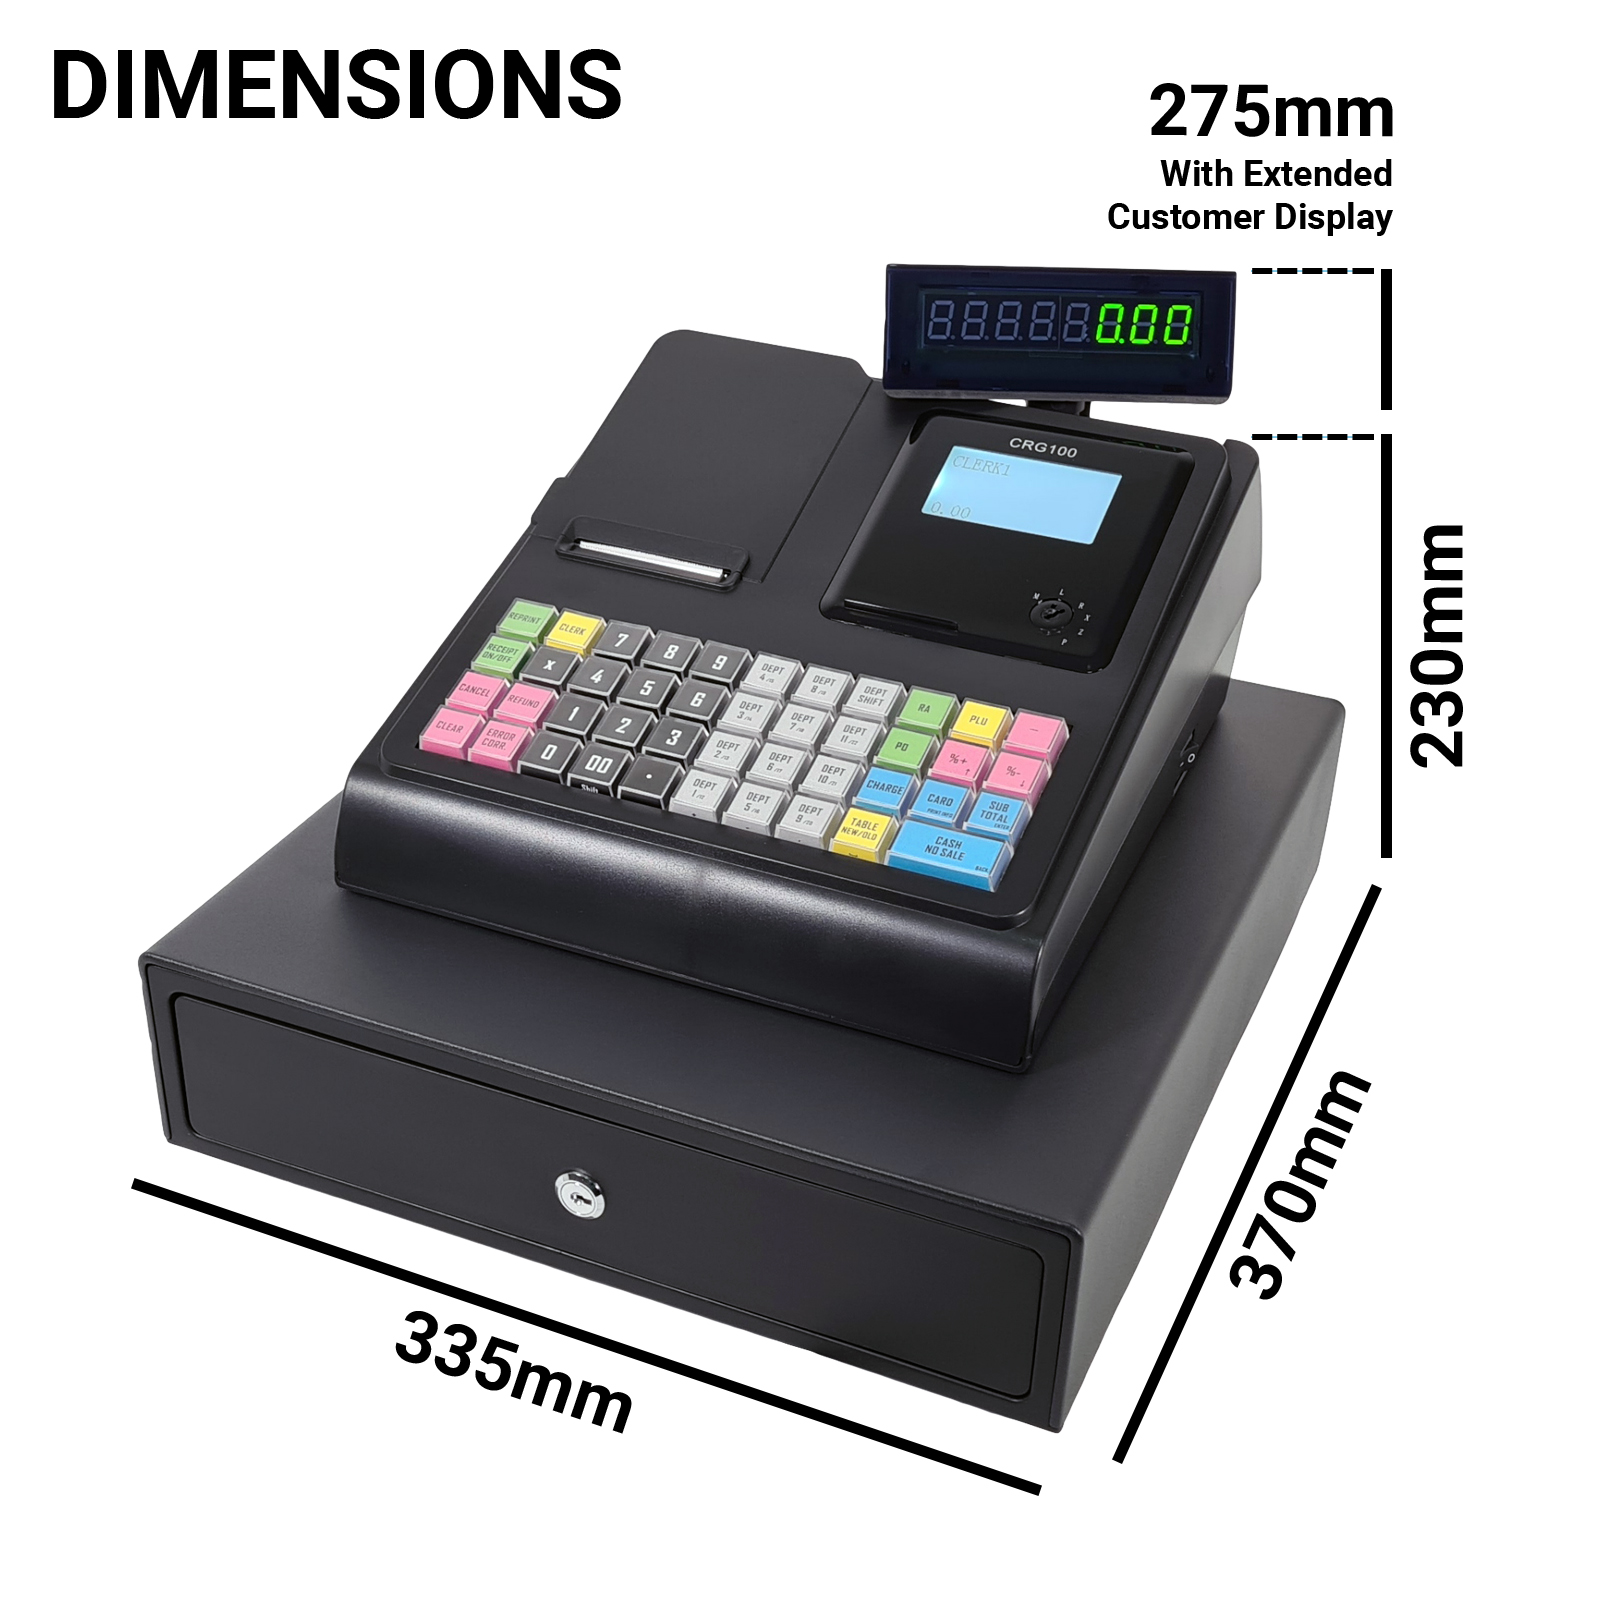 CRG100 Black Cash Register and Till Drawer - OUT OF STOCK - Please see 100BLD